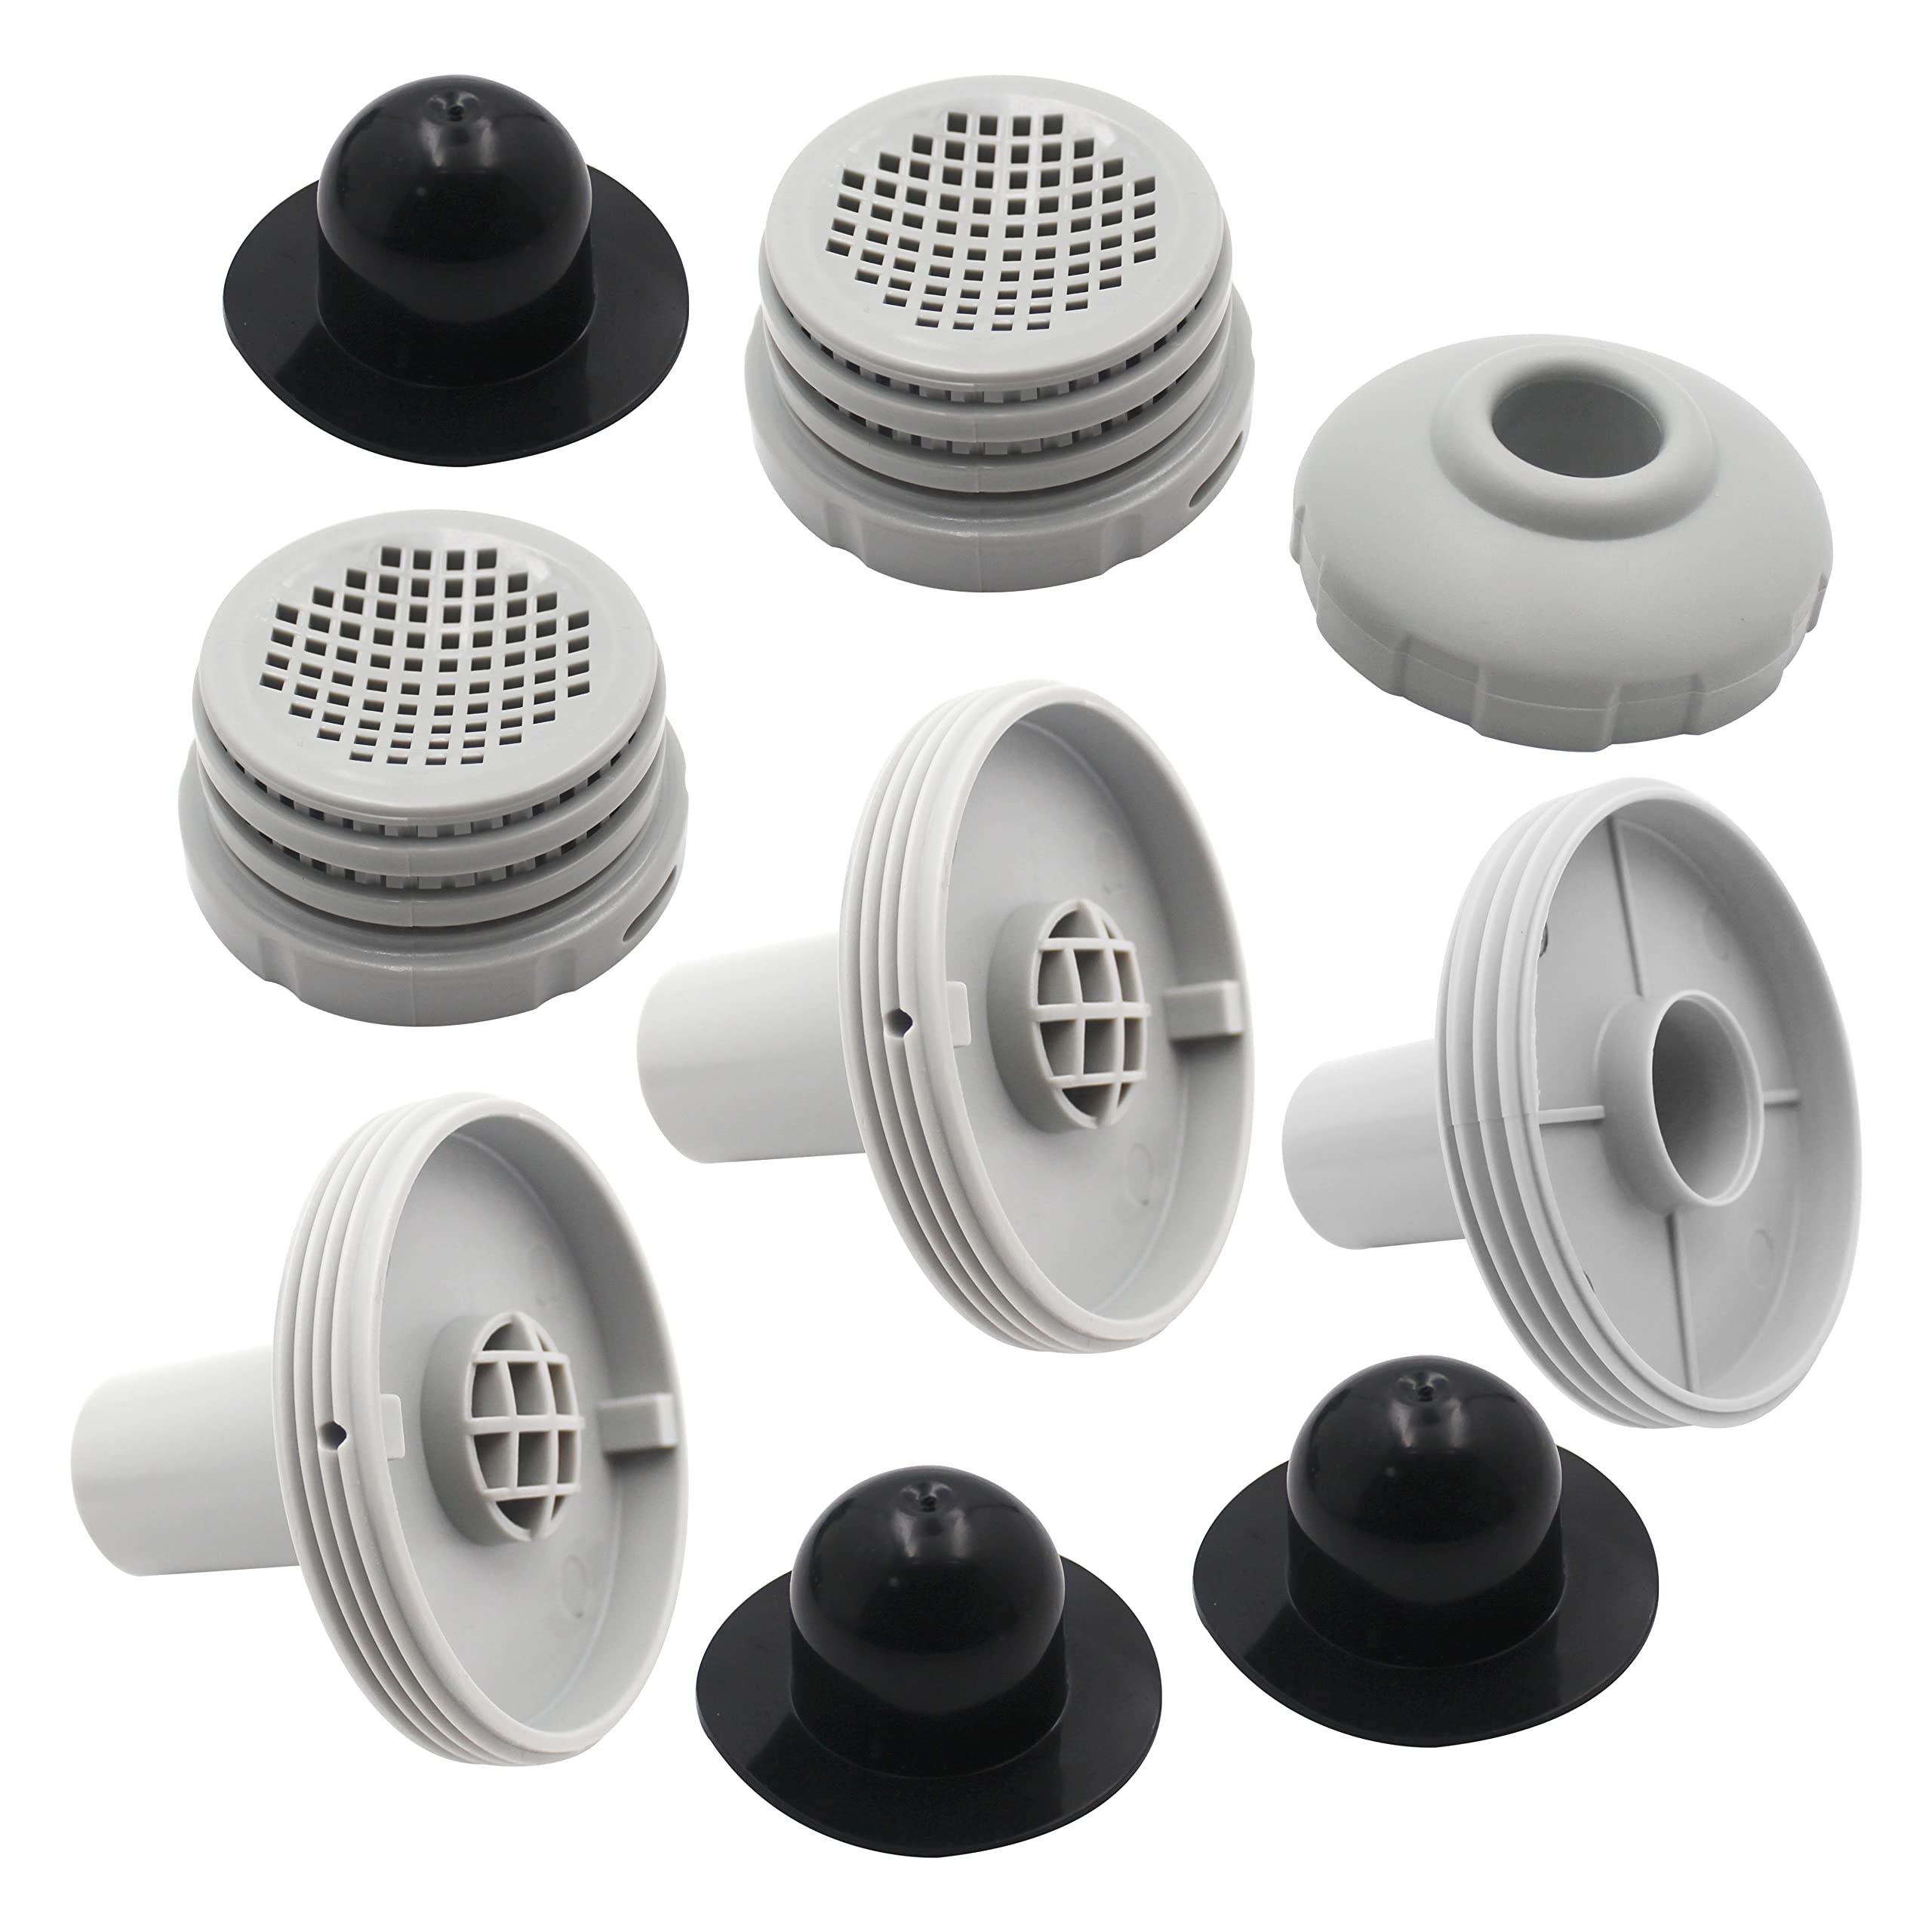 TIROAR 25022E Swimming Pool Water Jet Connector Kits with Outlet Strainer Grid,Inlet Nozzle and Hole Plug with 1.25 Inch Fittings